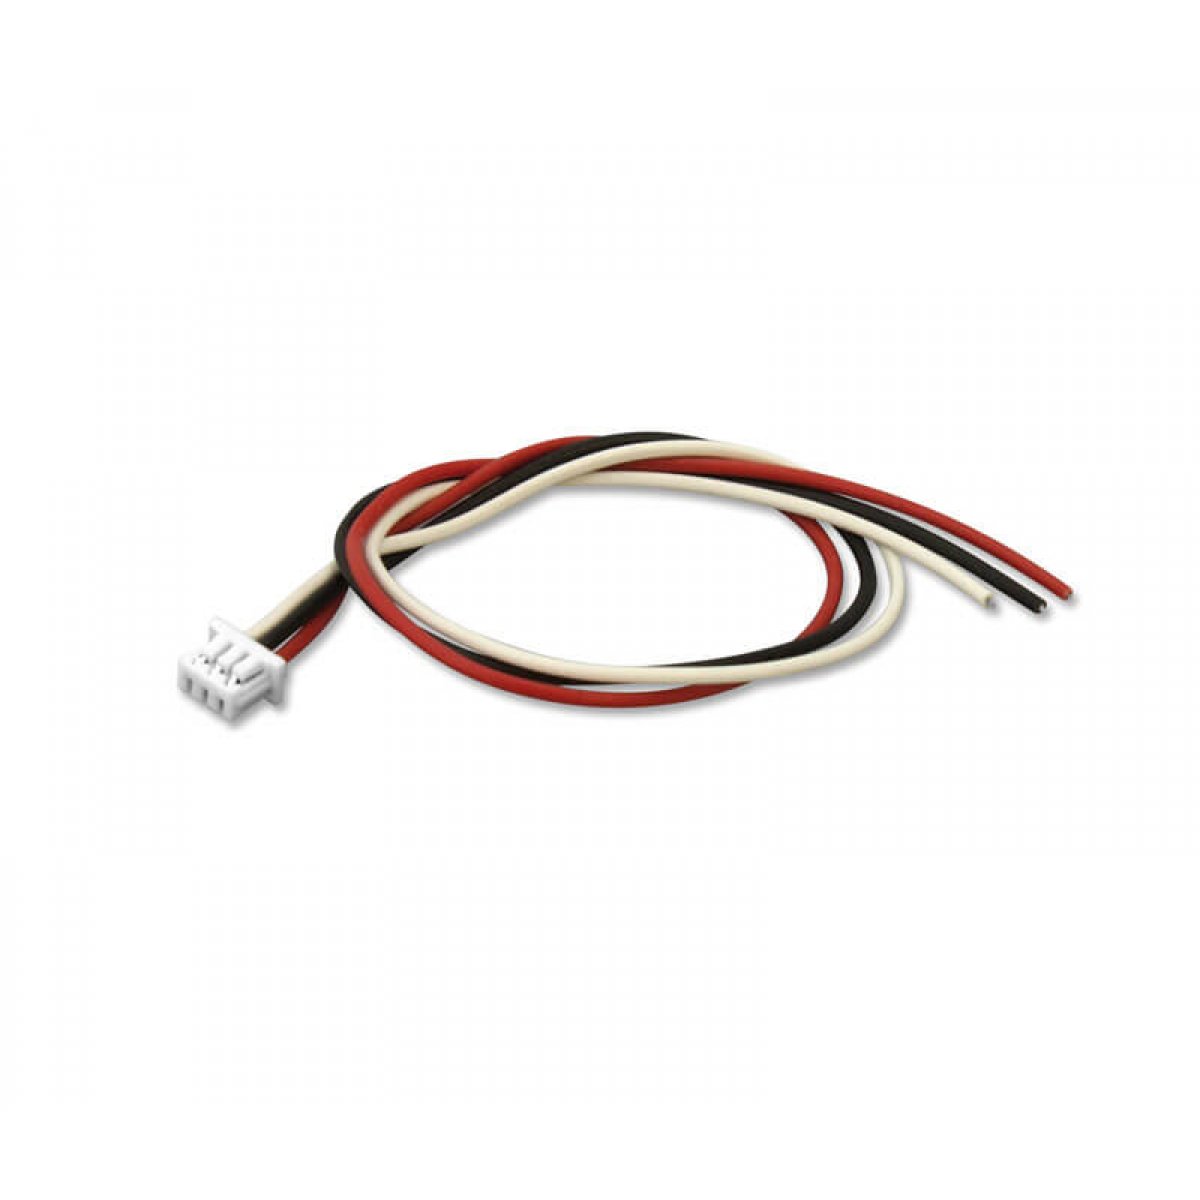 CONECTOR AEREO HEMBRA 3P CABLE 14cm (4,7x2,5x4,0mm